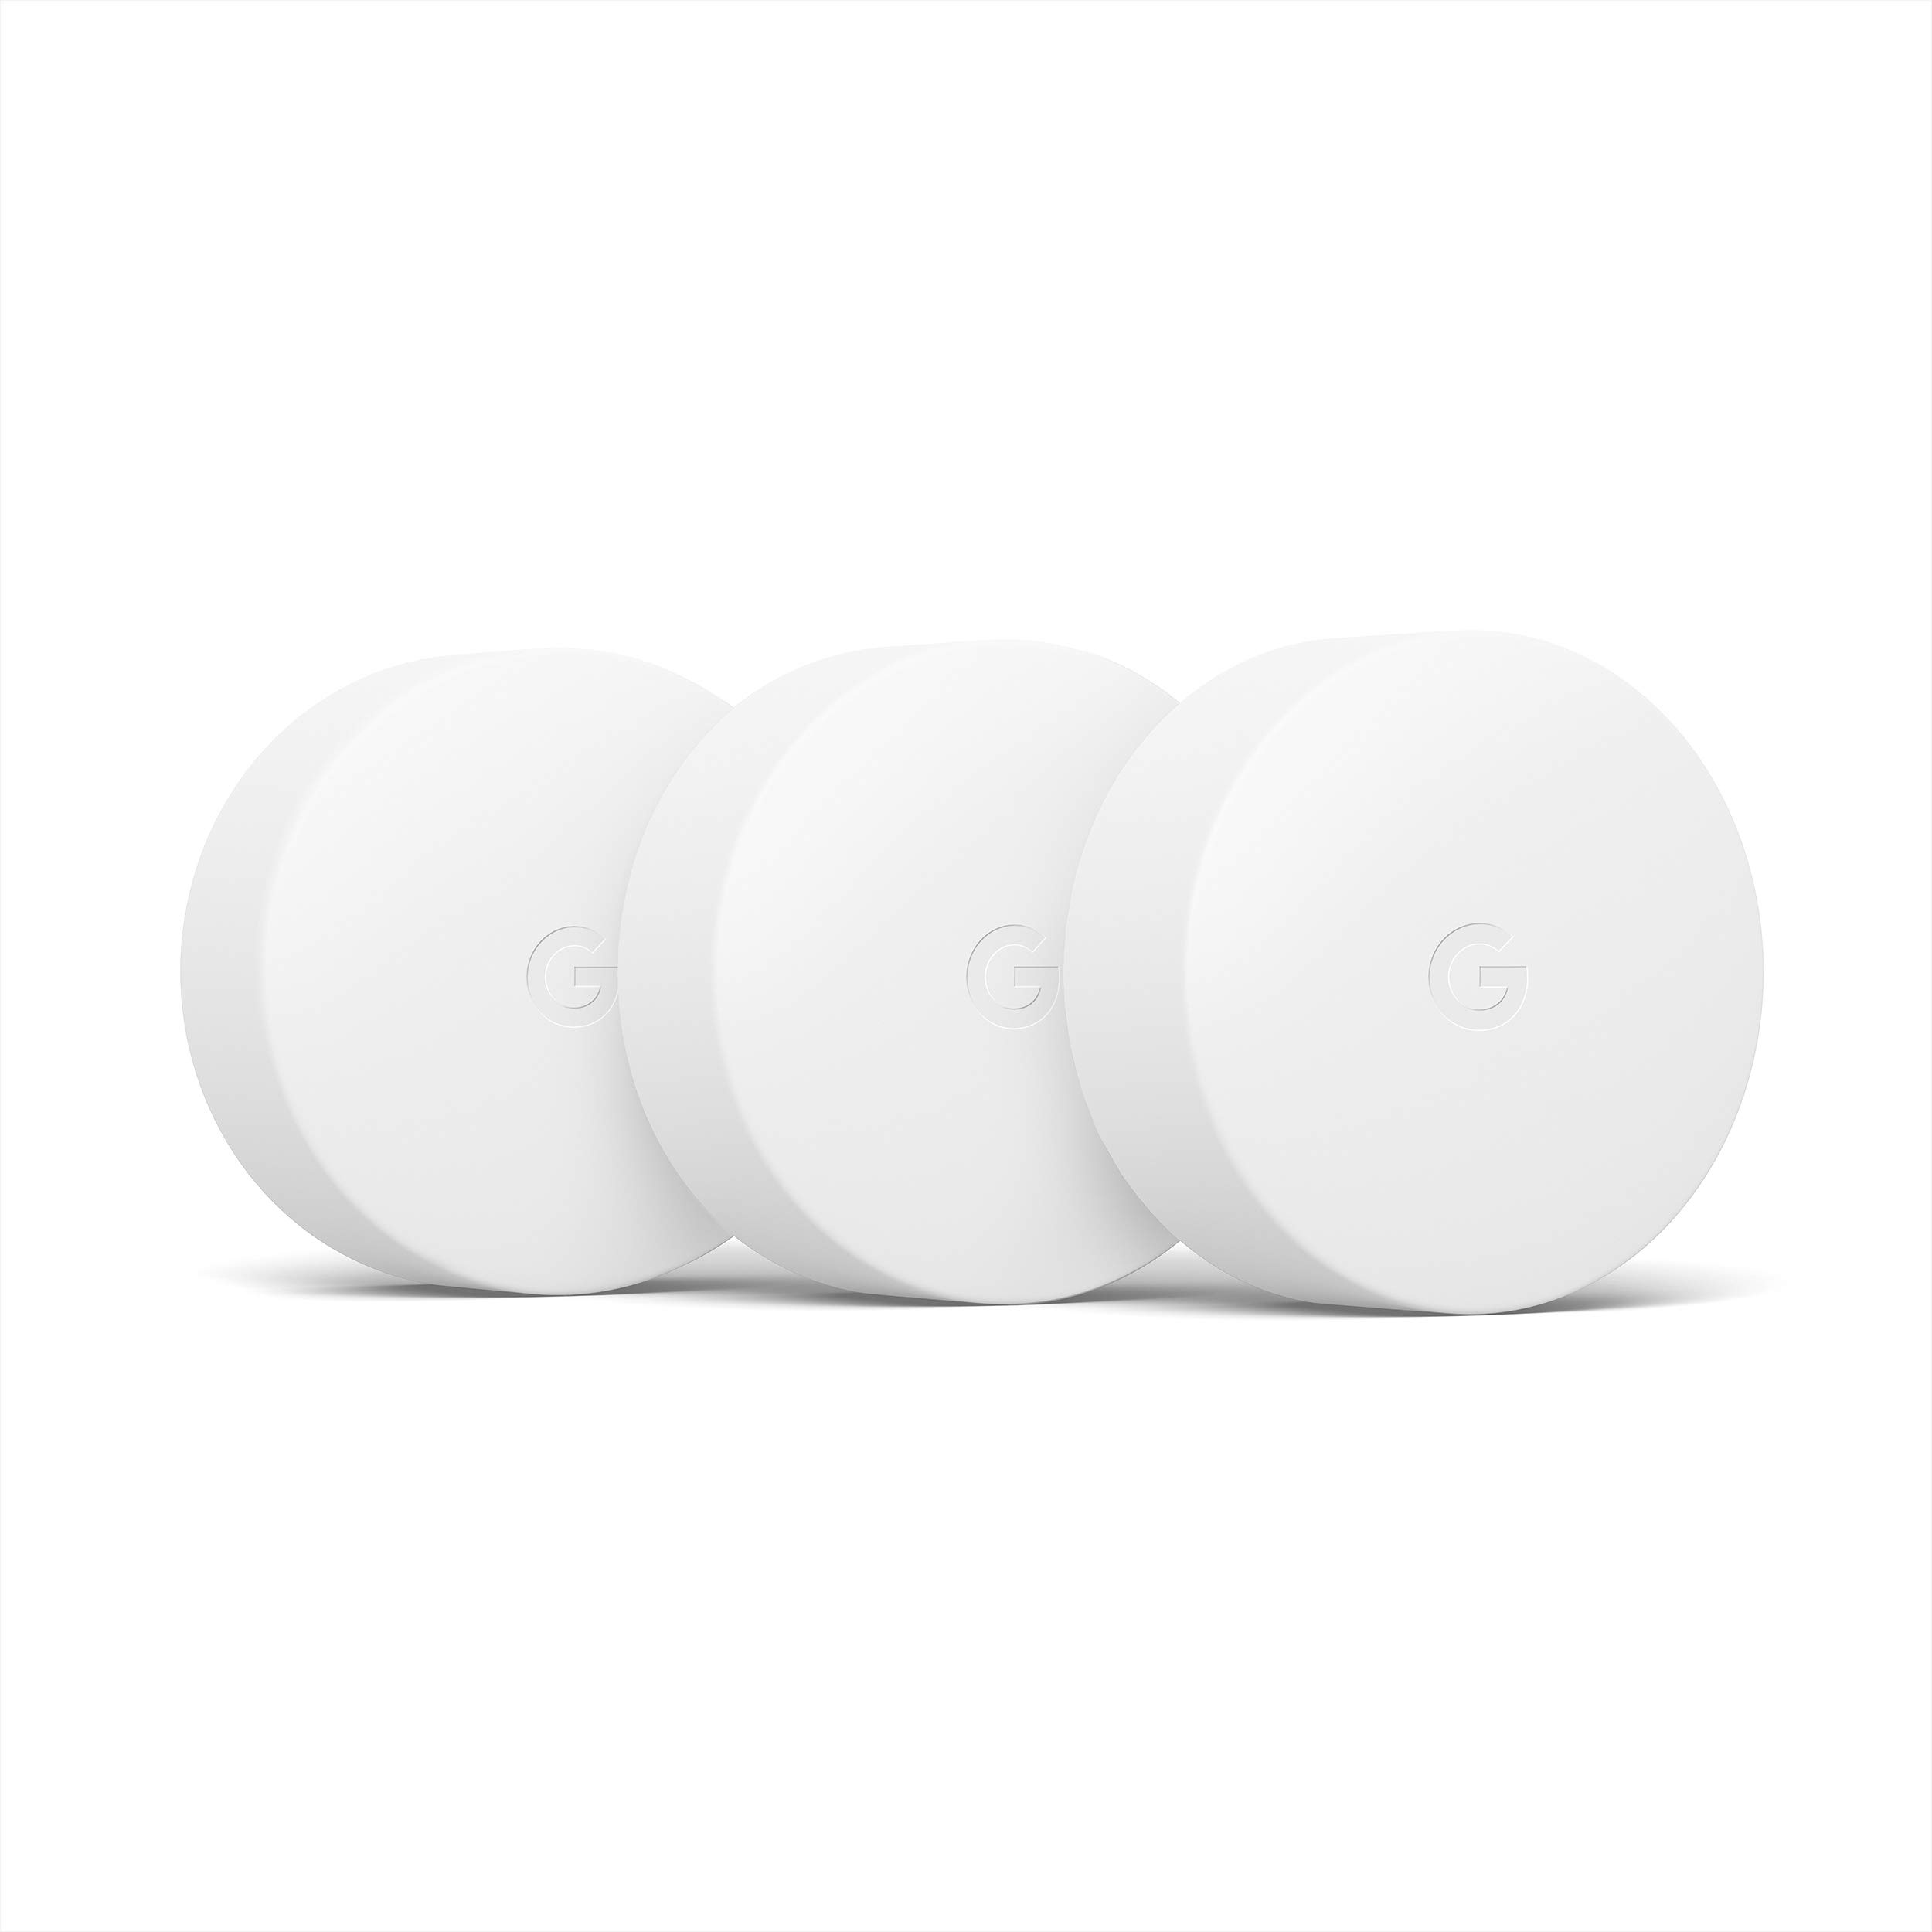 3-Pack Google Nest Temperature Sensor for Nest Thermostat $84.95 + Free Shipping